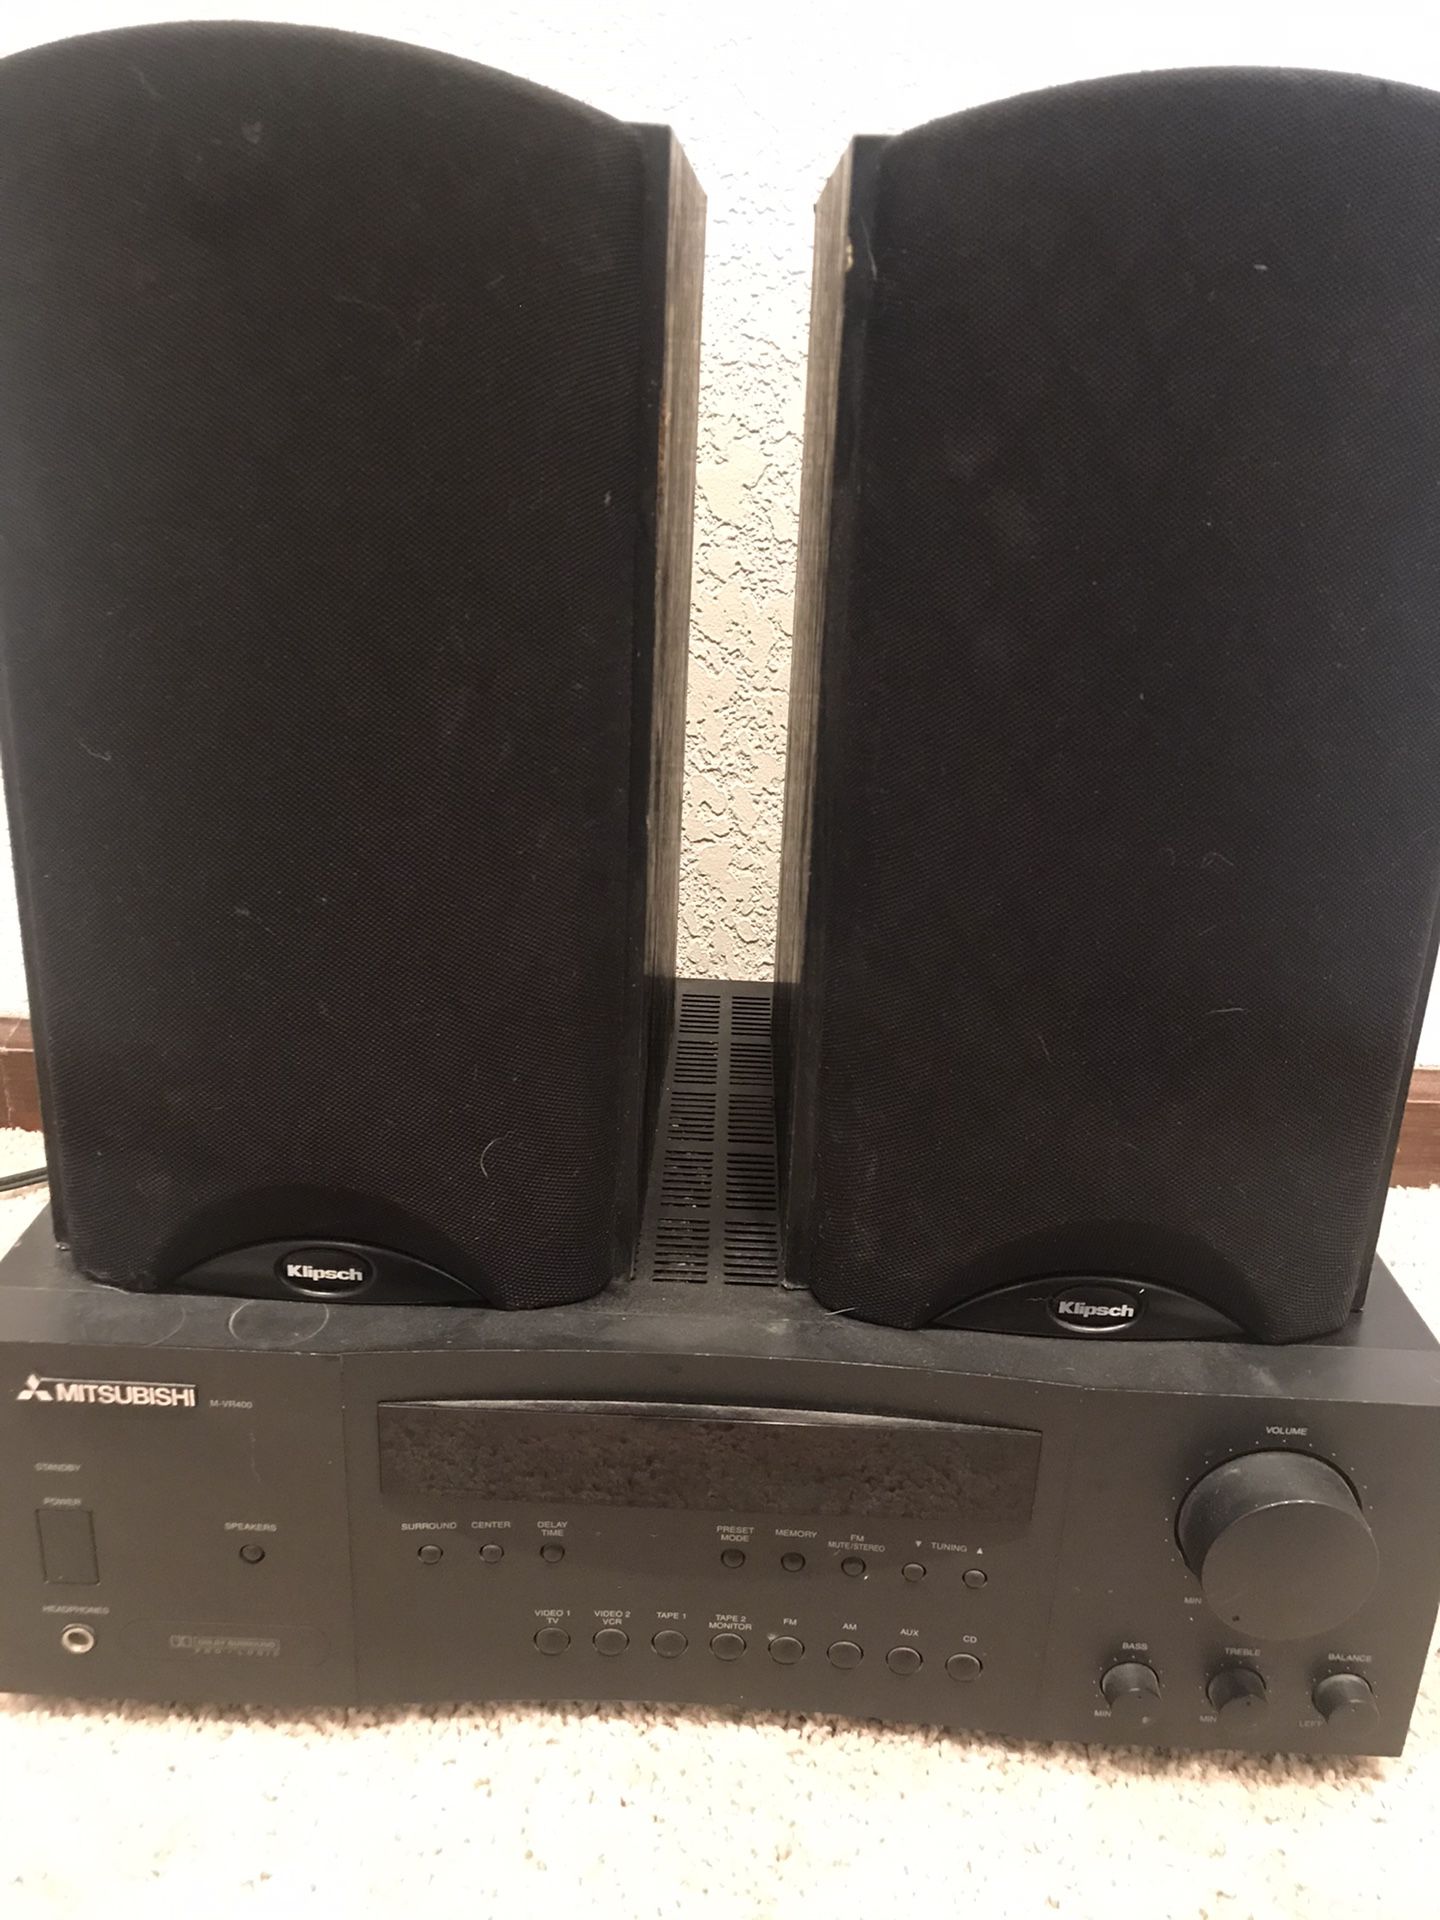 Pair of Klipsch speakers and Mitsubishi receiver